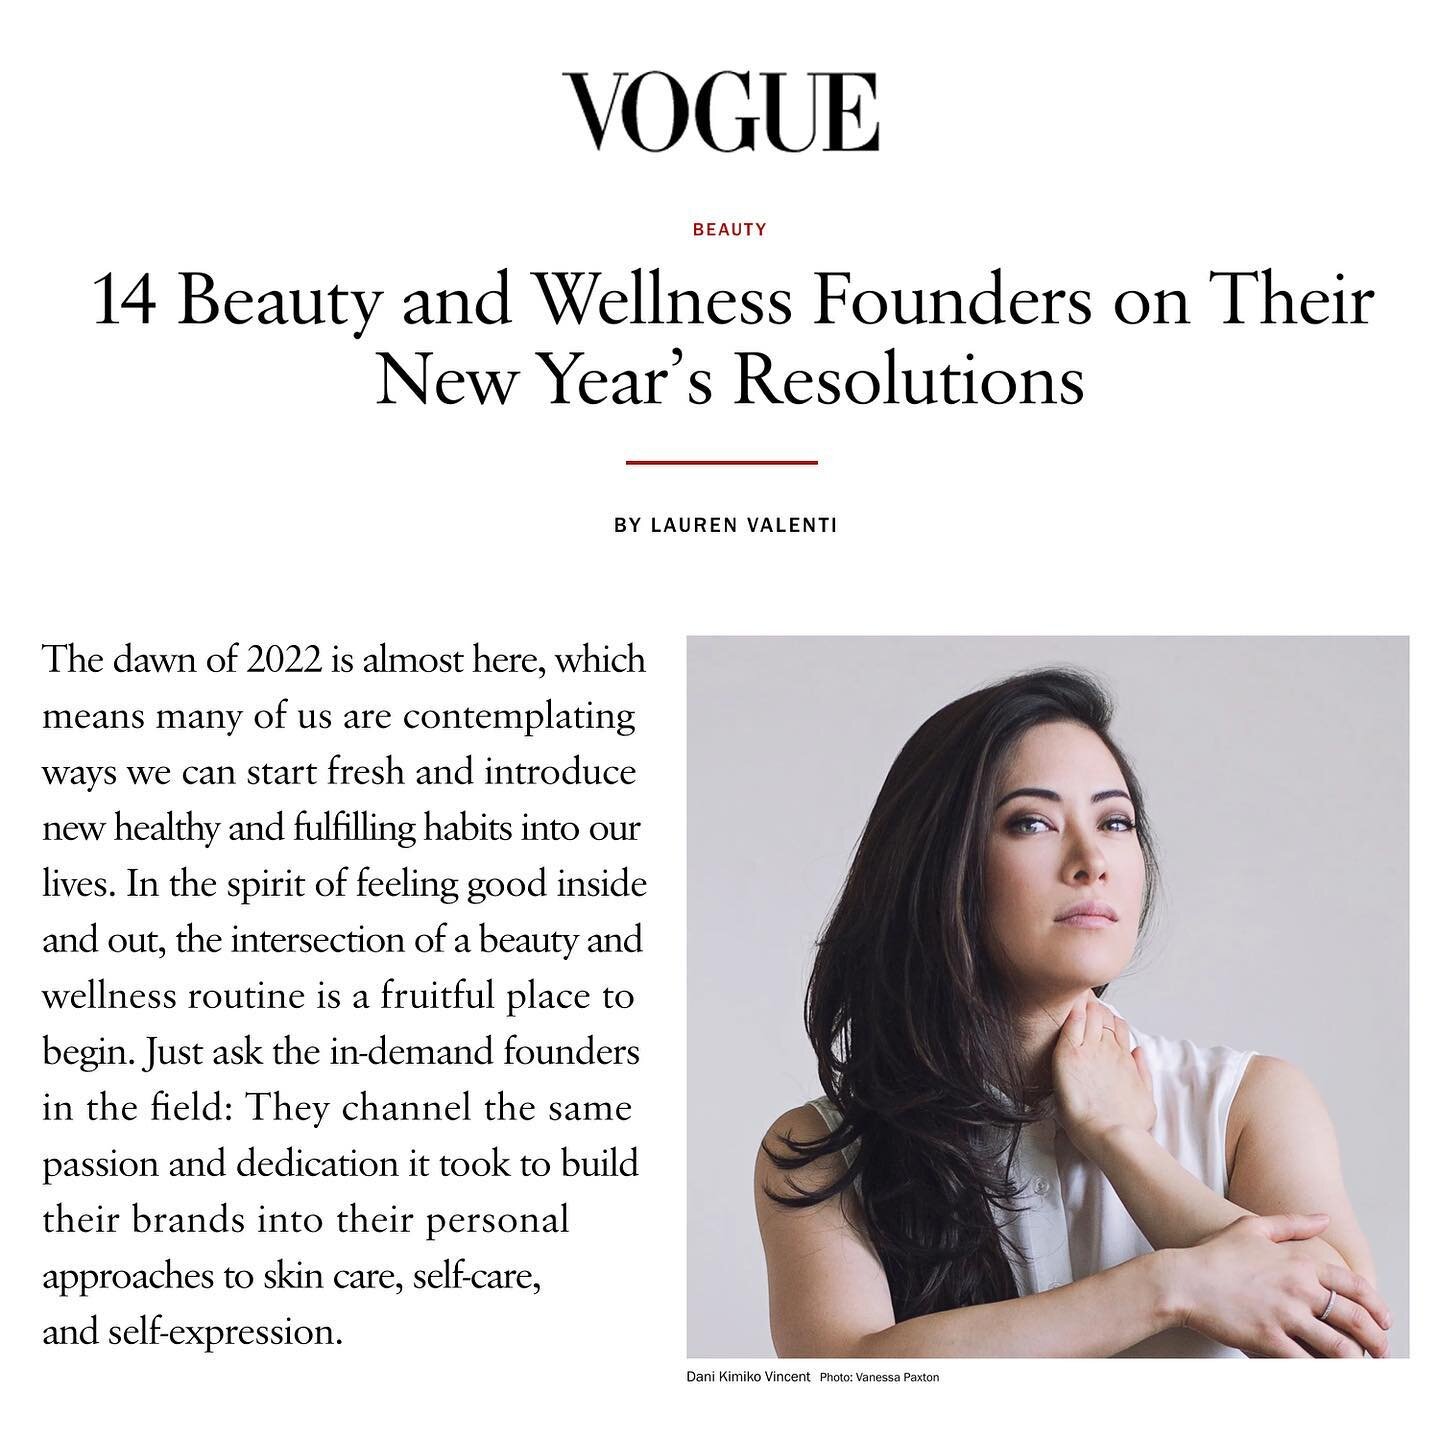 What a treat to share my 2022 beauty and wellness resolutions with VOGUE @voguemagazine 
Thank you very much @lauren_valenti 🤍!!
Here&rsquo;s to a happy, healthy and restorative 2022 for us all!✨
#happynewyear #letsgo